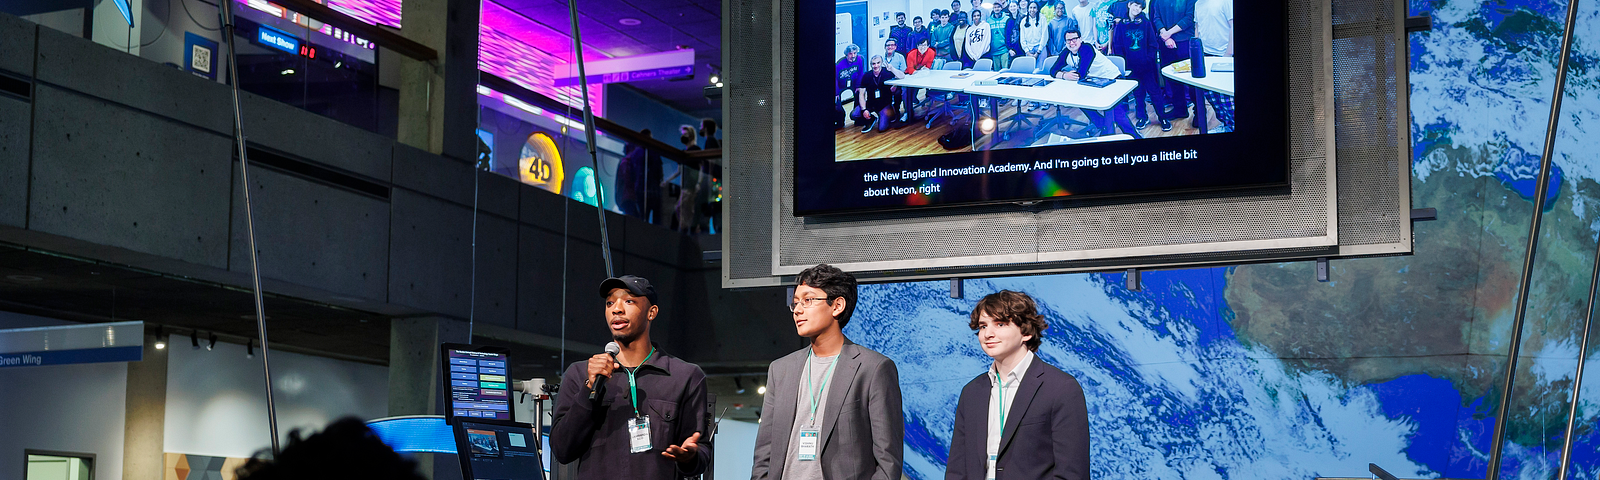 Three students stand on a stage with a large monitor behind them displaying a group of people and the words “Thank you.”